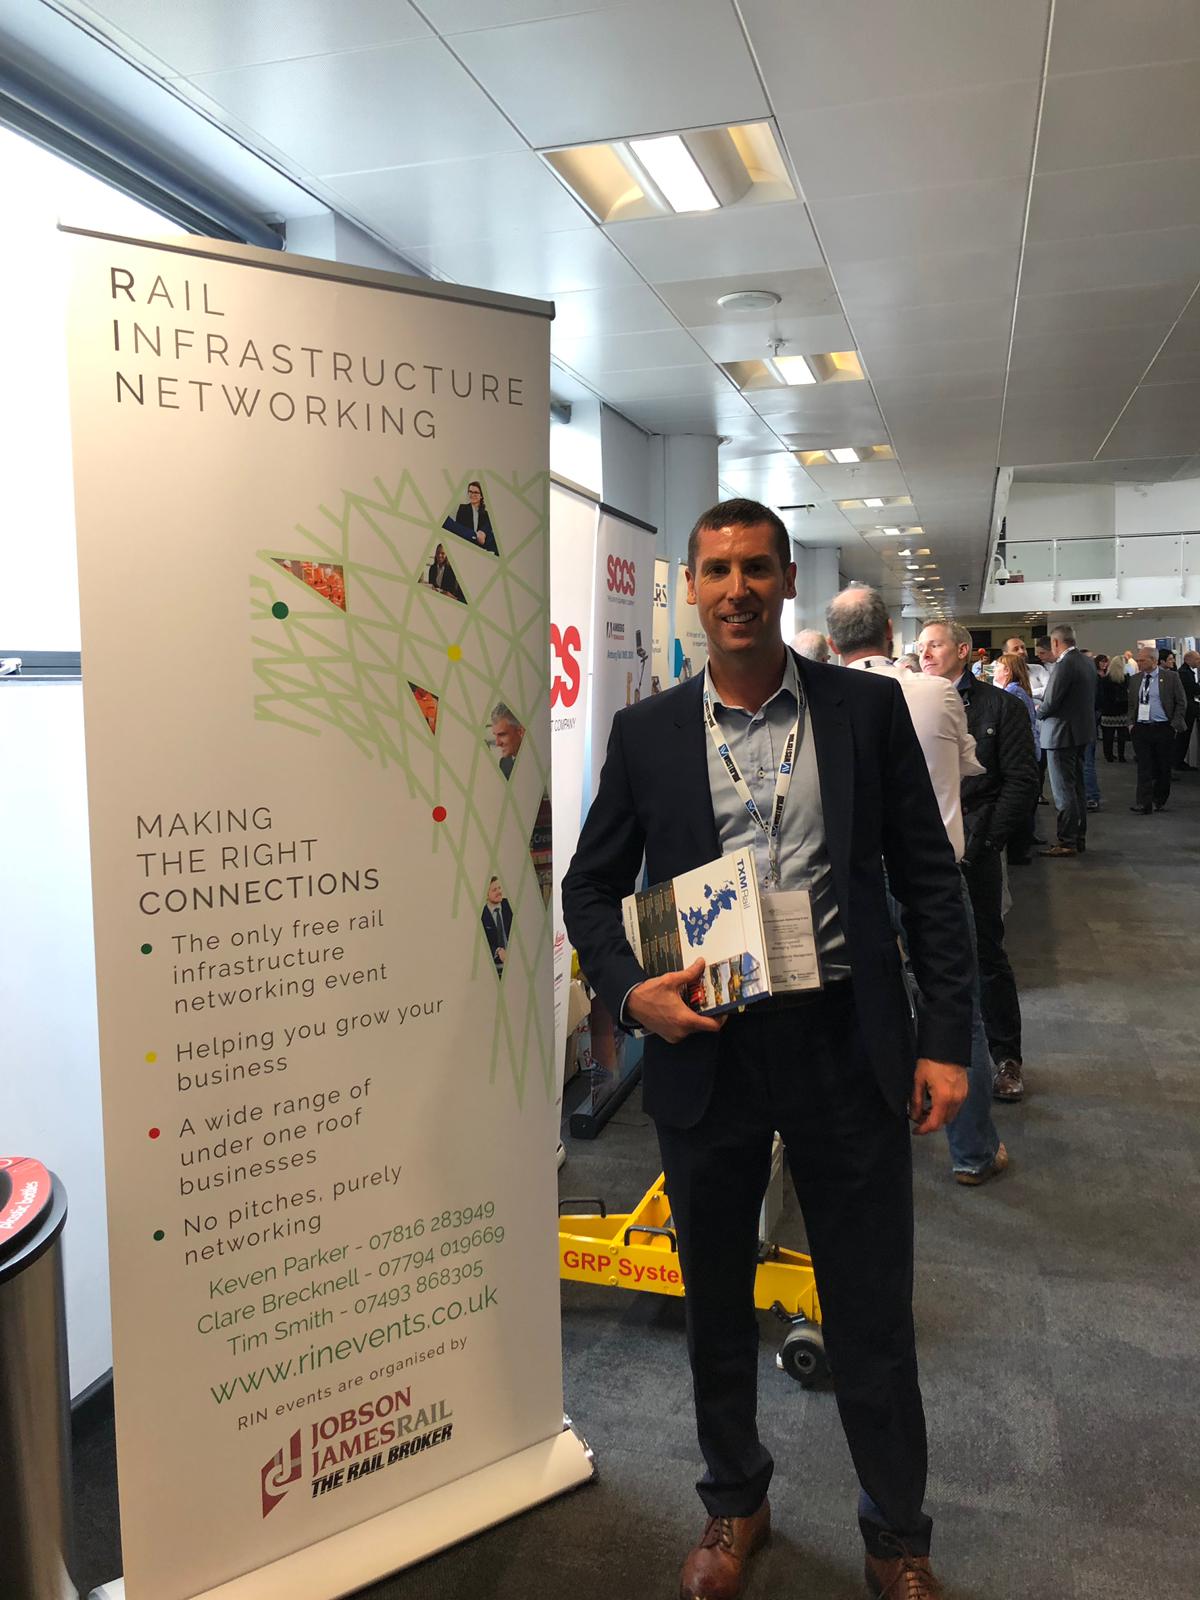 Alan Lingwood at the Rail Infrastructure Networking event